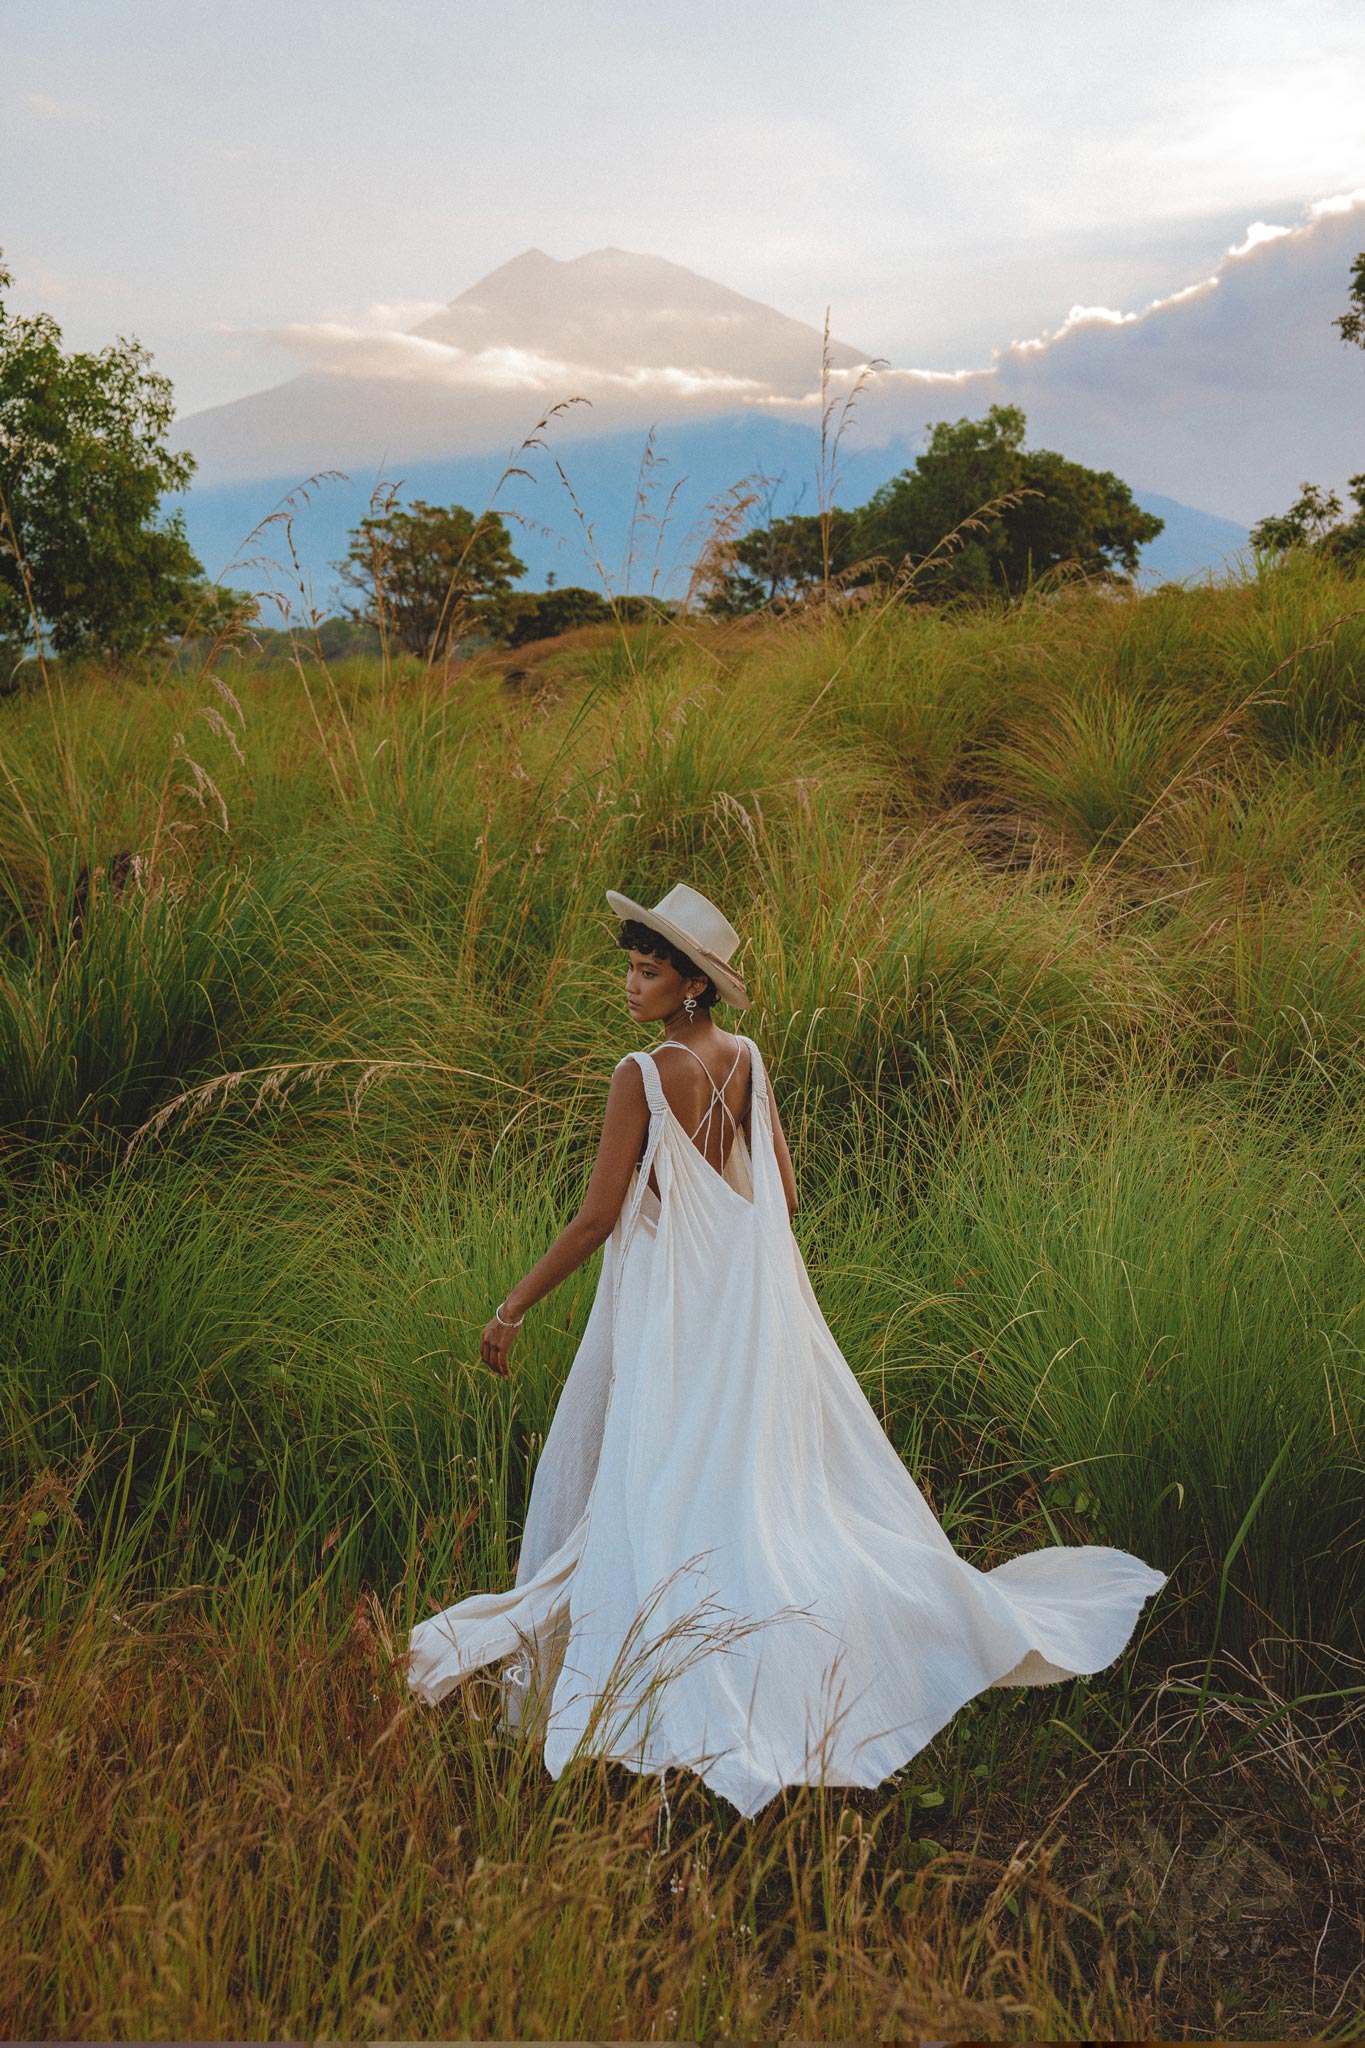 Show off your divine style in the Off-White Greek Goddess Cape Dress from Aya Sacred Wear.